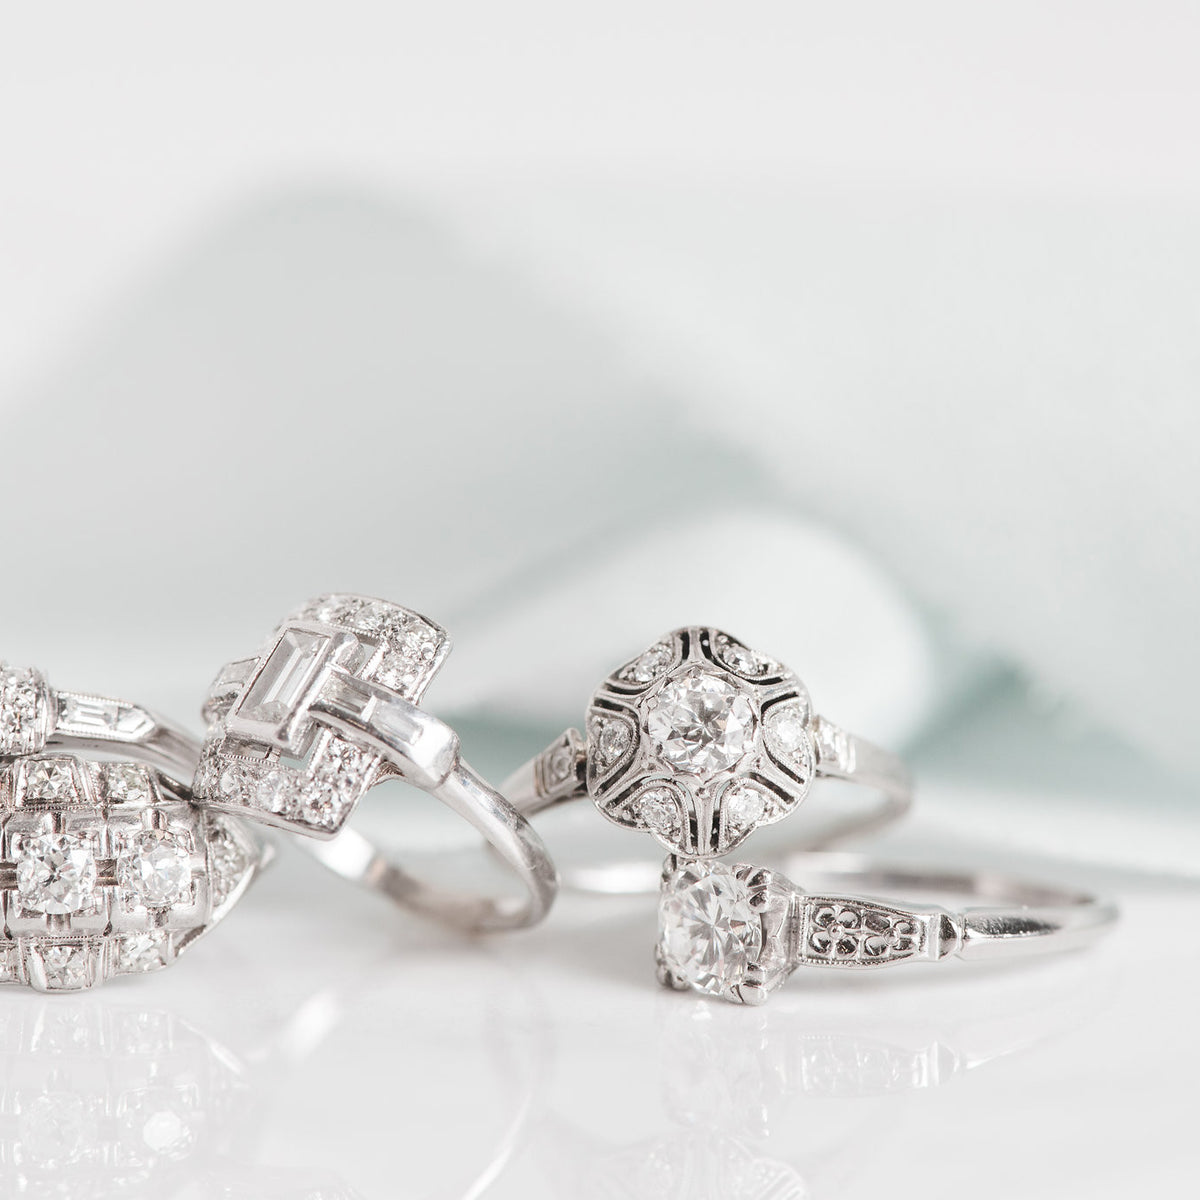 5 Reasons To Buy A Pre-Owned Engagement Ring | myGemma